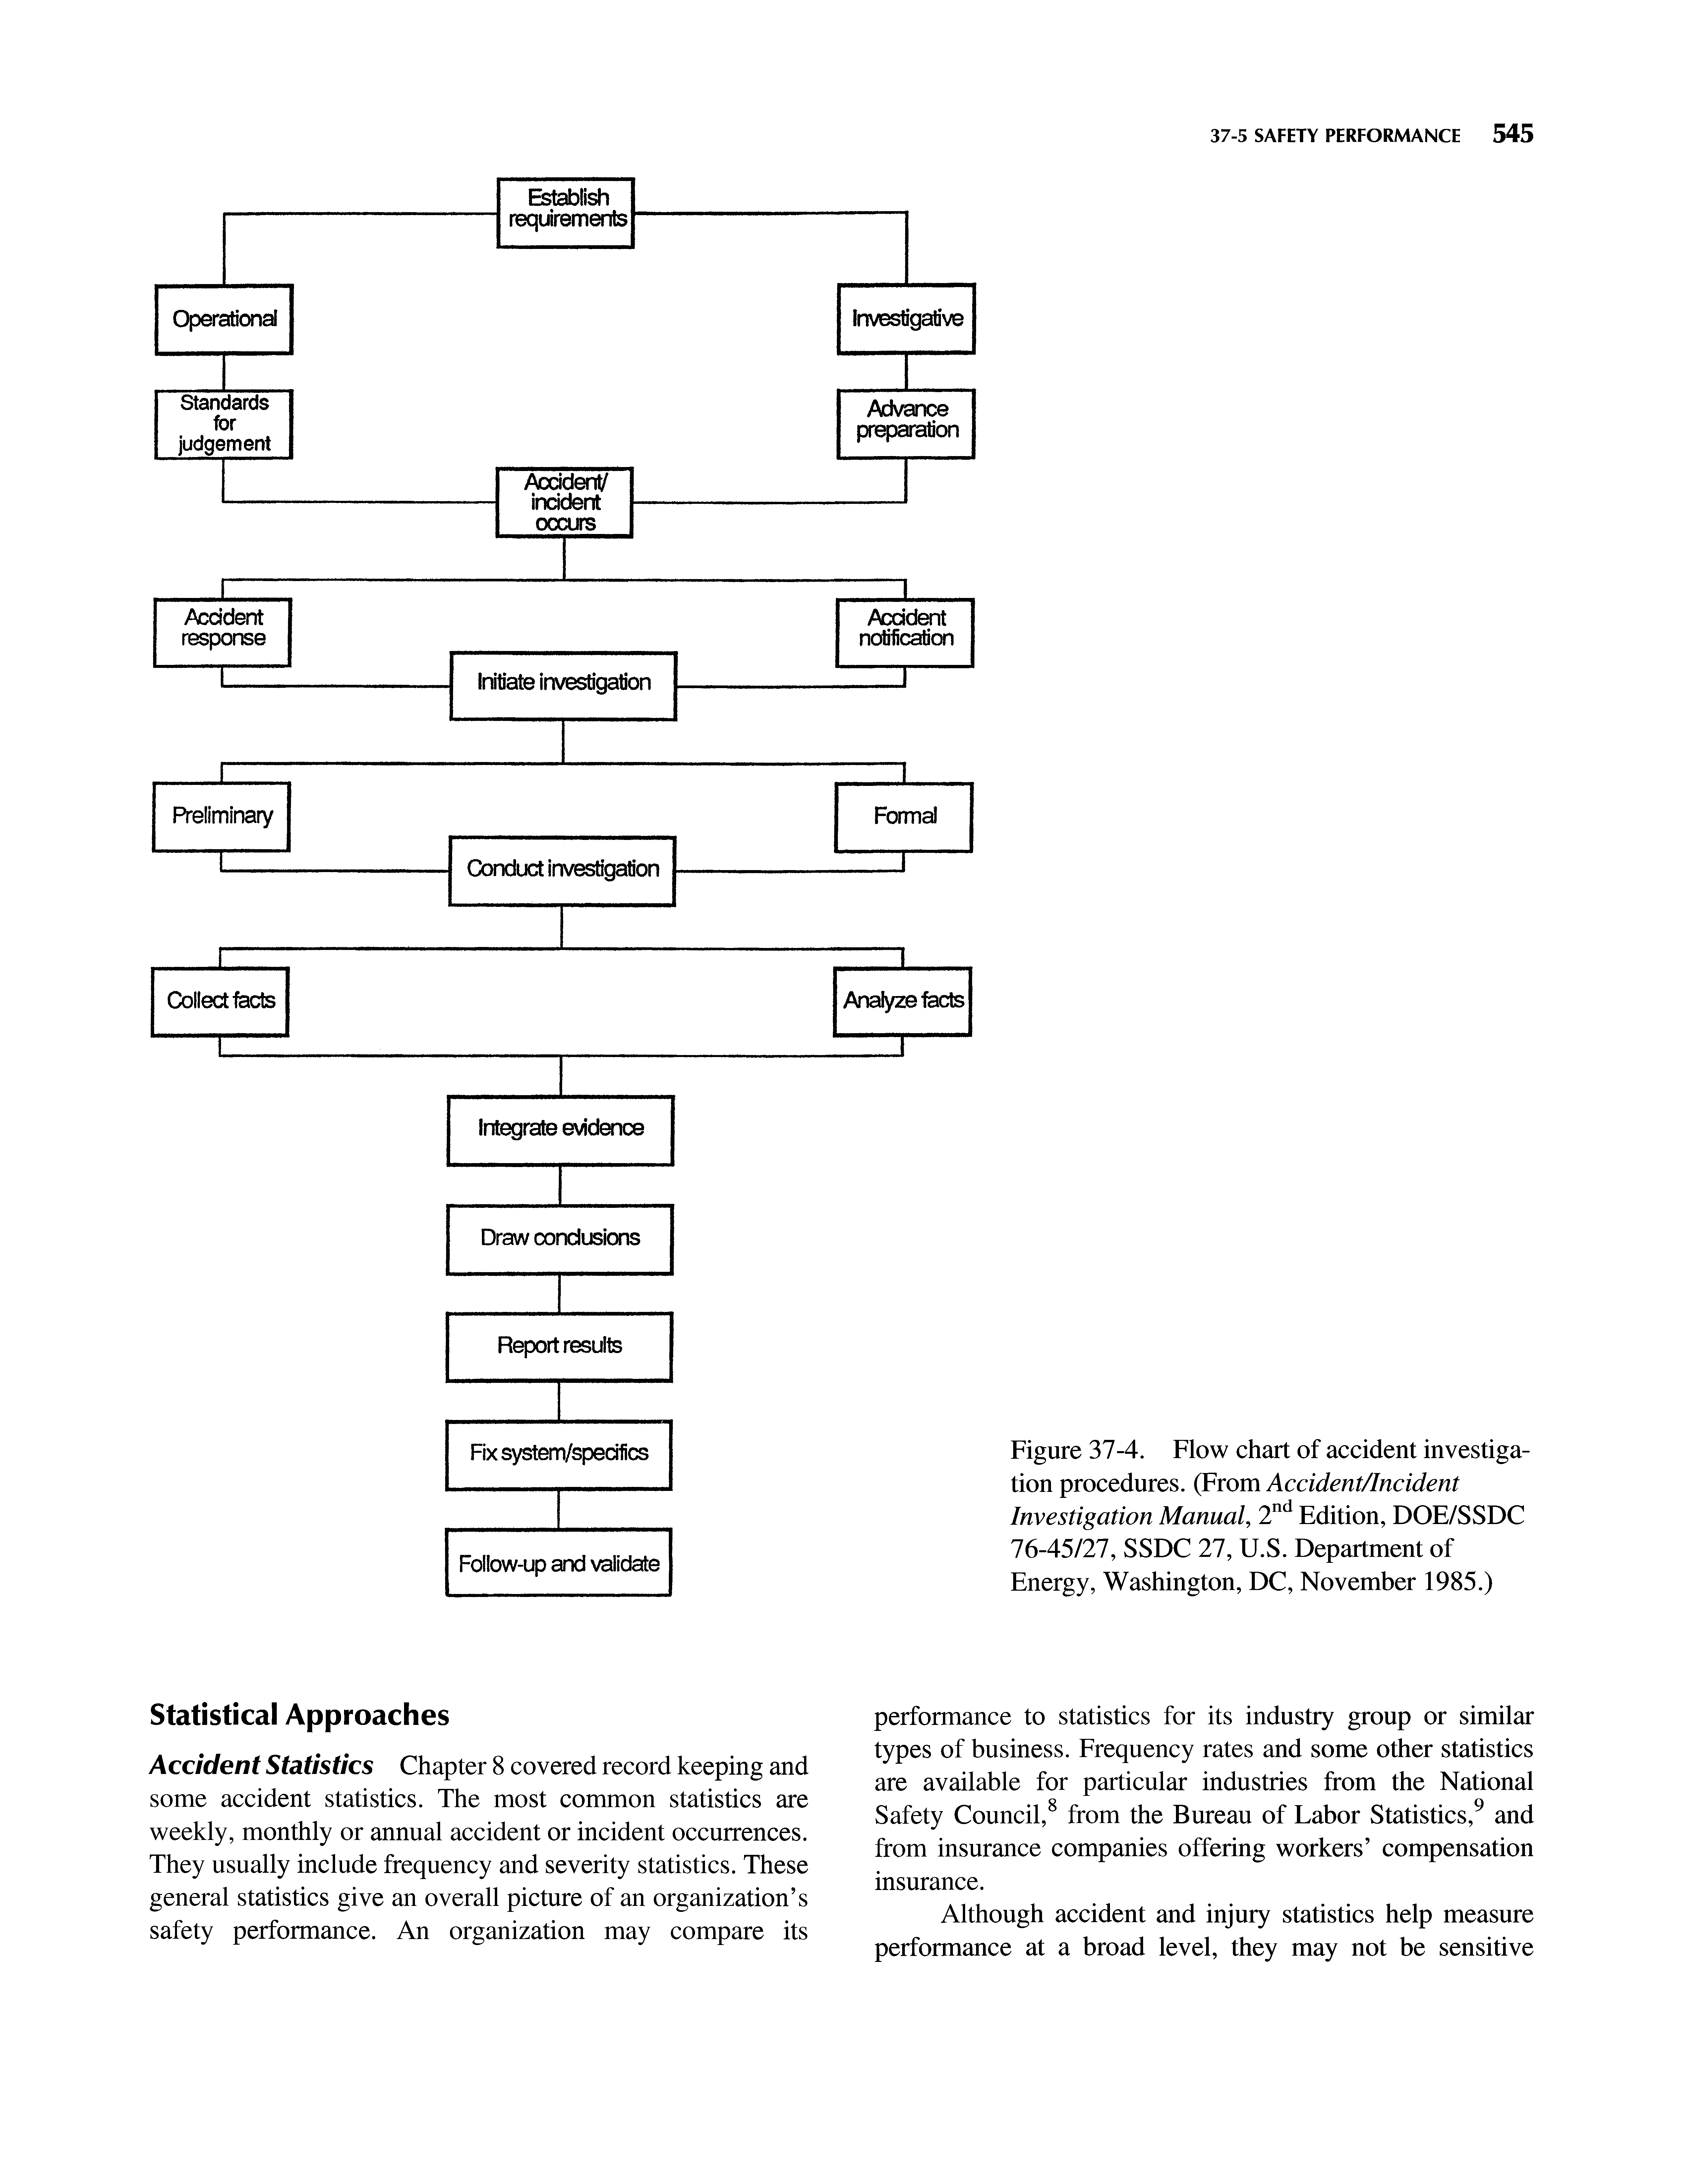 Figure 37-4. Flow chart of accident investigation procedures. (From Accident/Incident Investigation Manual, 2 Edition, DOE/SSDC 76-45/27, SSDC 27, U.S. Department of Energy, Washington, DC, November 1985.)...